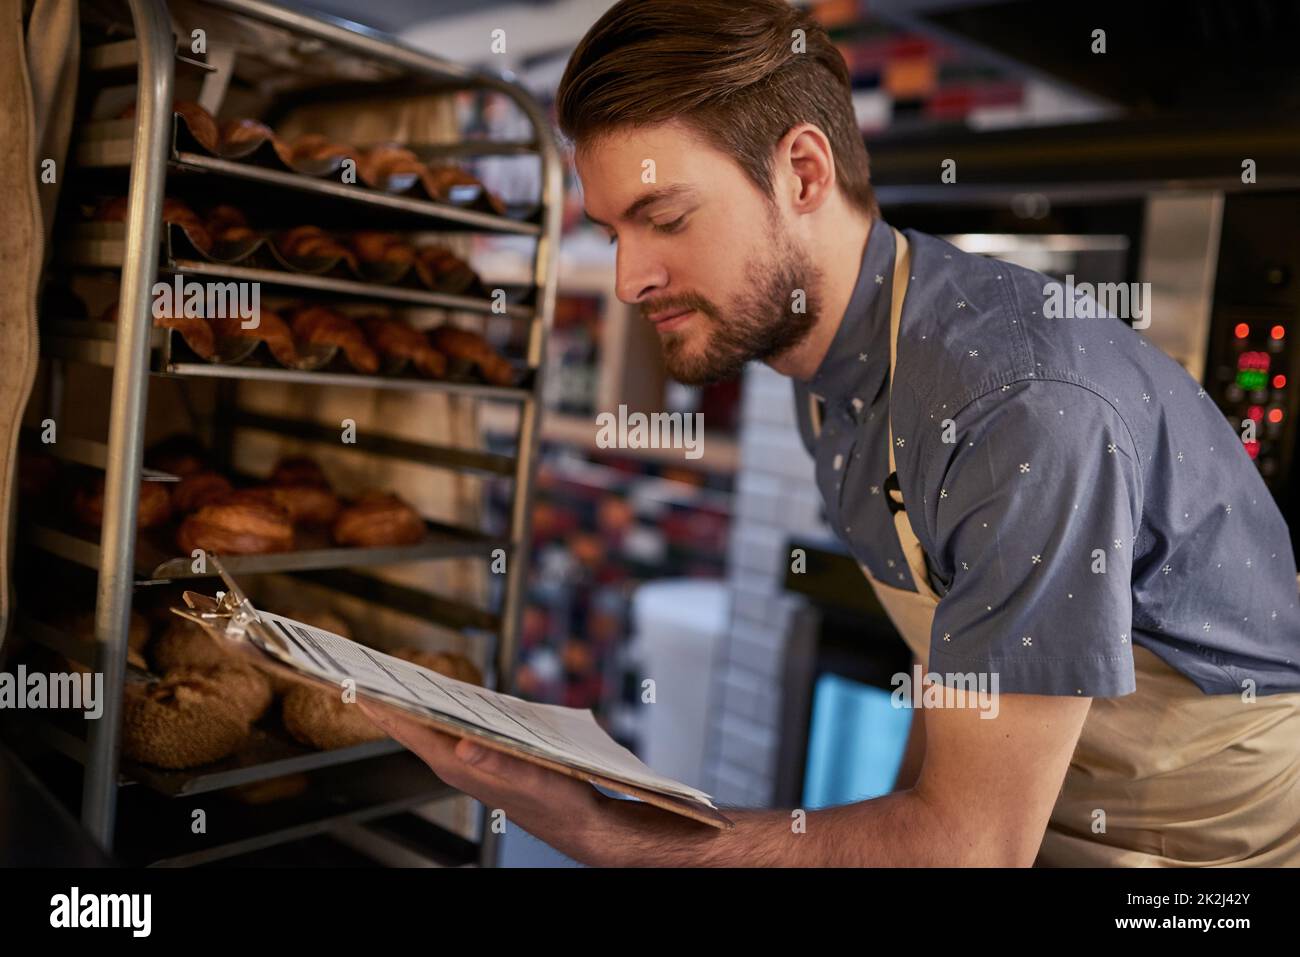 Making sure everything is baked to perfection. Shot of a young business owner counting his baked goods. Stock Photo